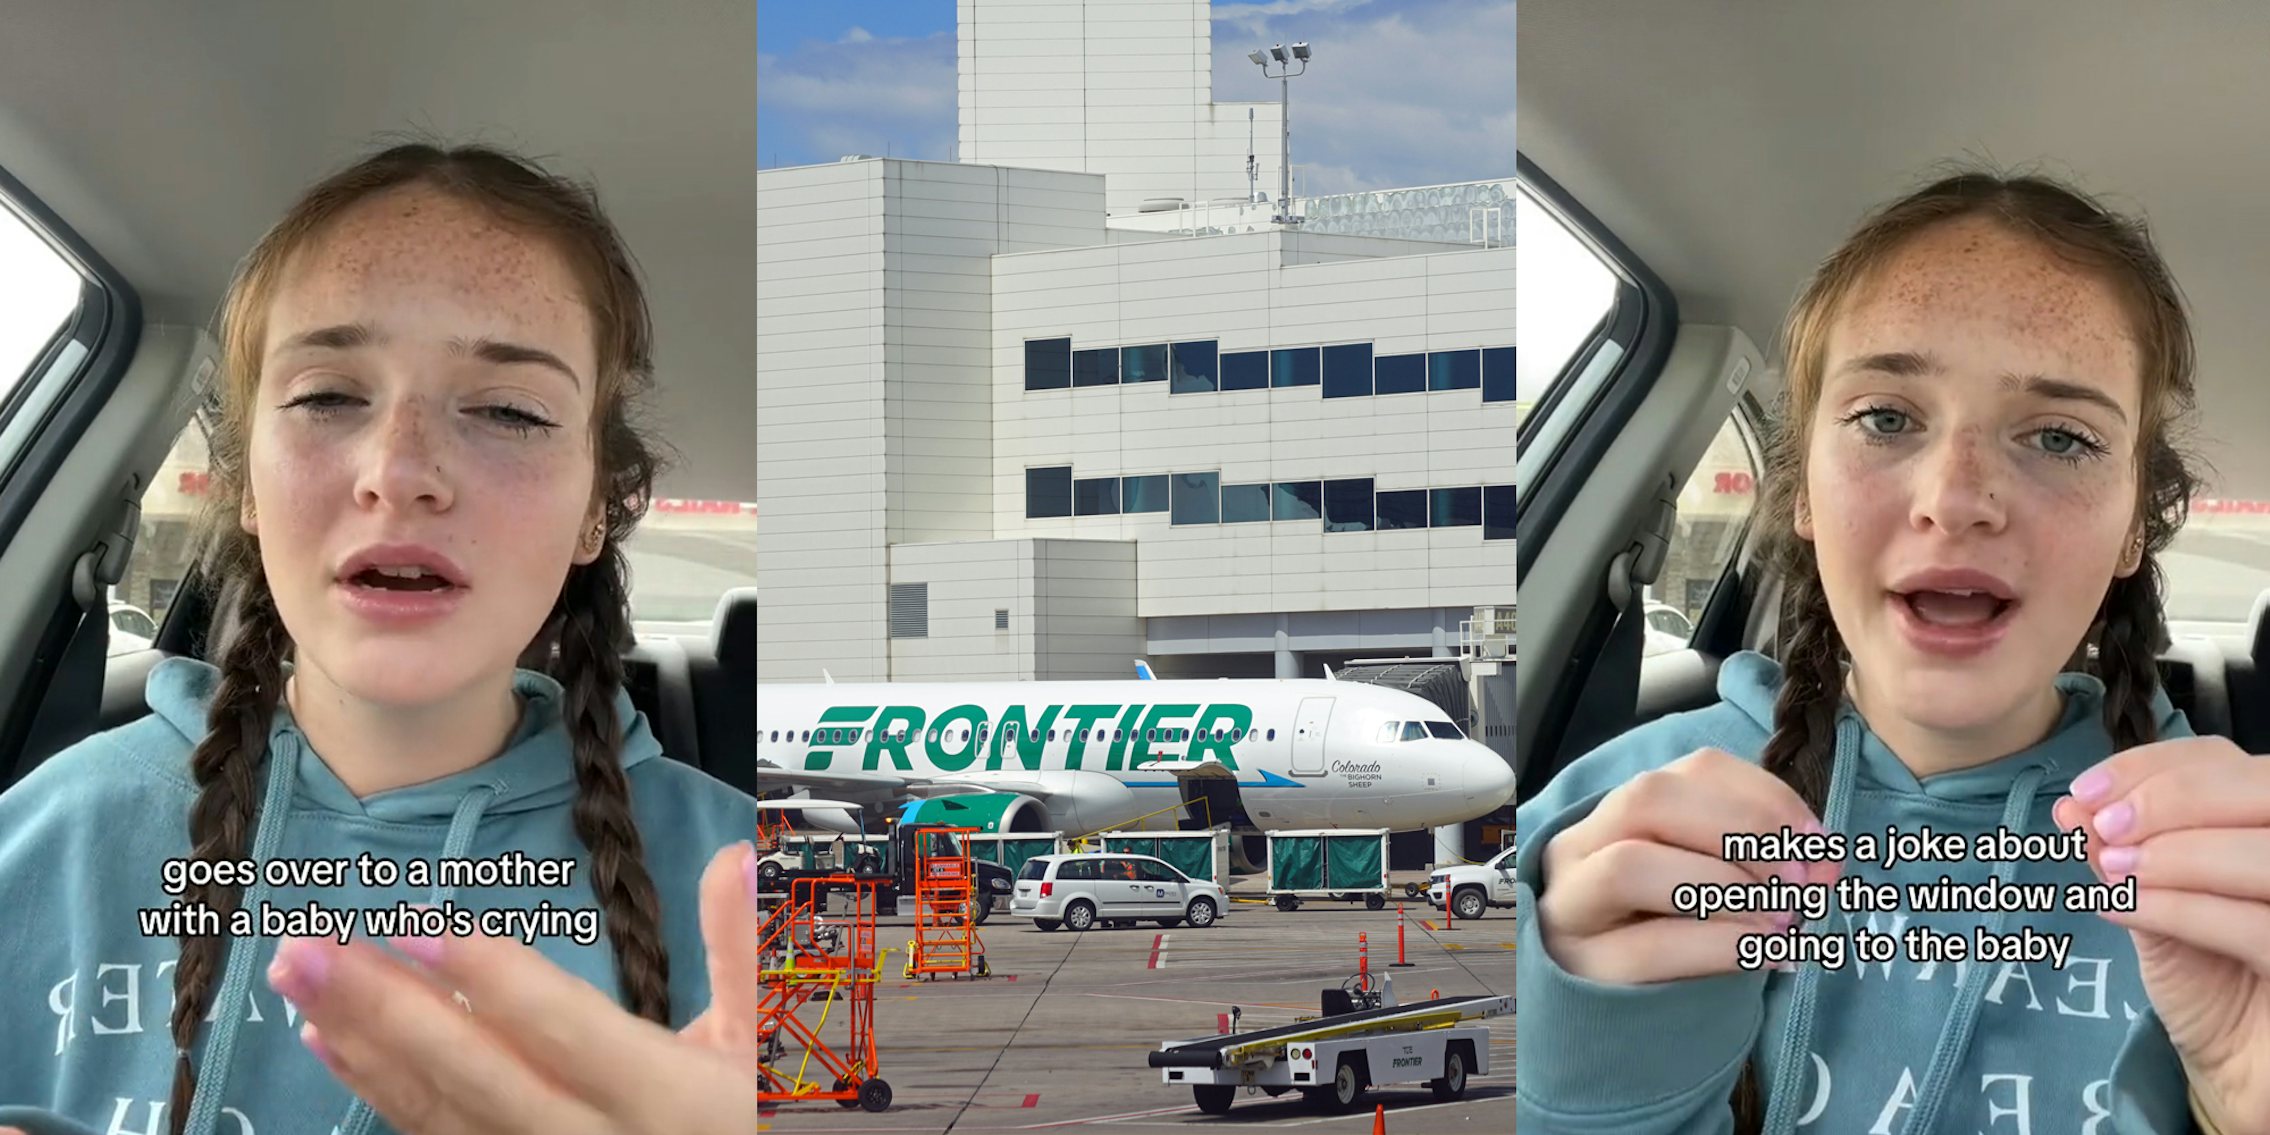 Frontier passenger speaking in car with caption 'goes over to a mother with a baby who's crying' (l) Frontier plane in runway (c) Frontier passenger speaking in car with caption 'makes a joke about opening the window and going to the baby